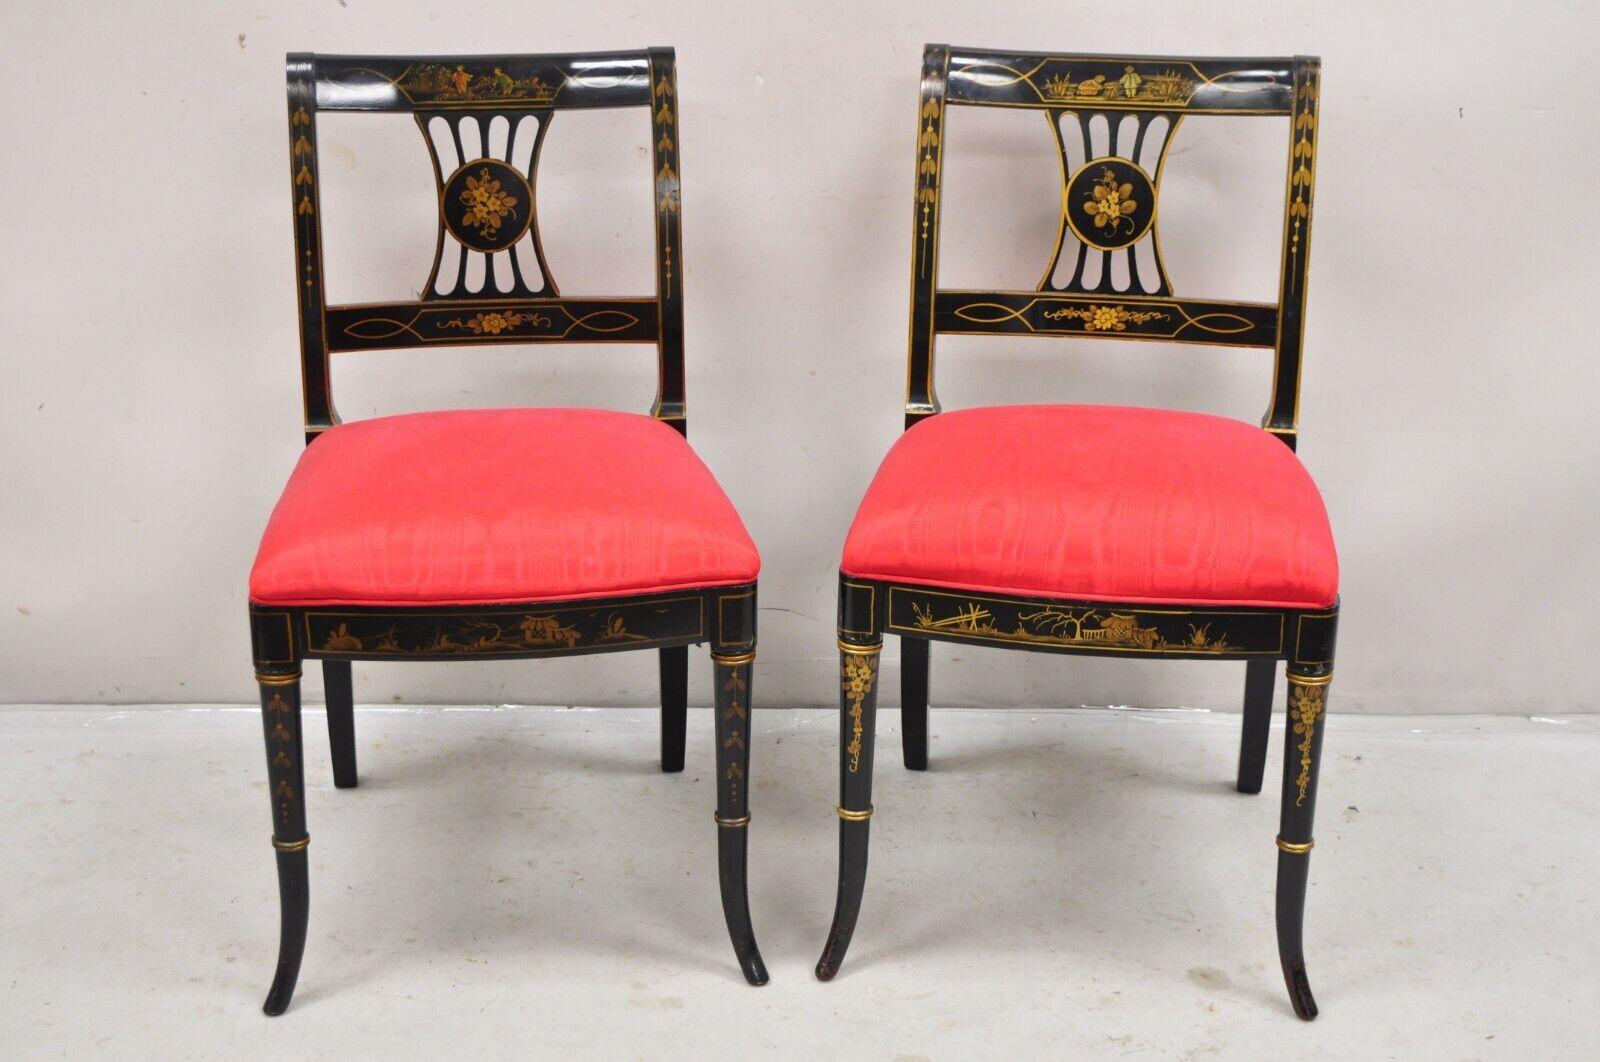 Vintage Chinoiserie English Regency Style Black Painted Dining Chairs - Set of 6 For Sale 6